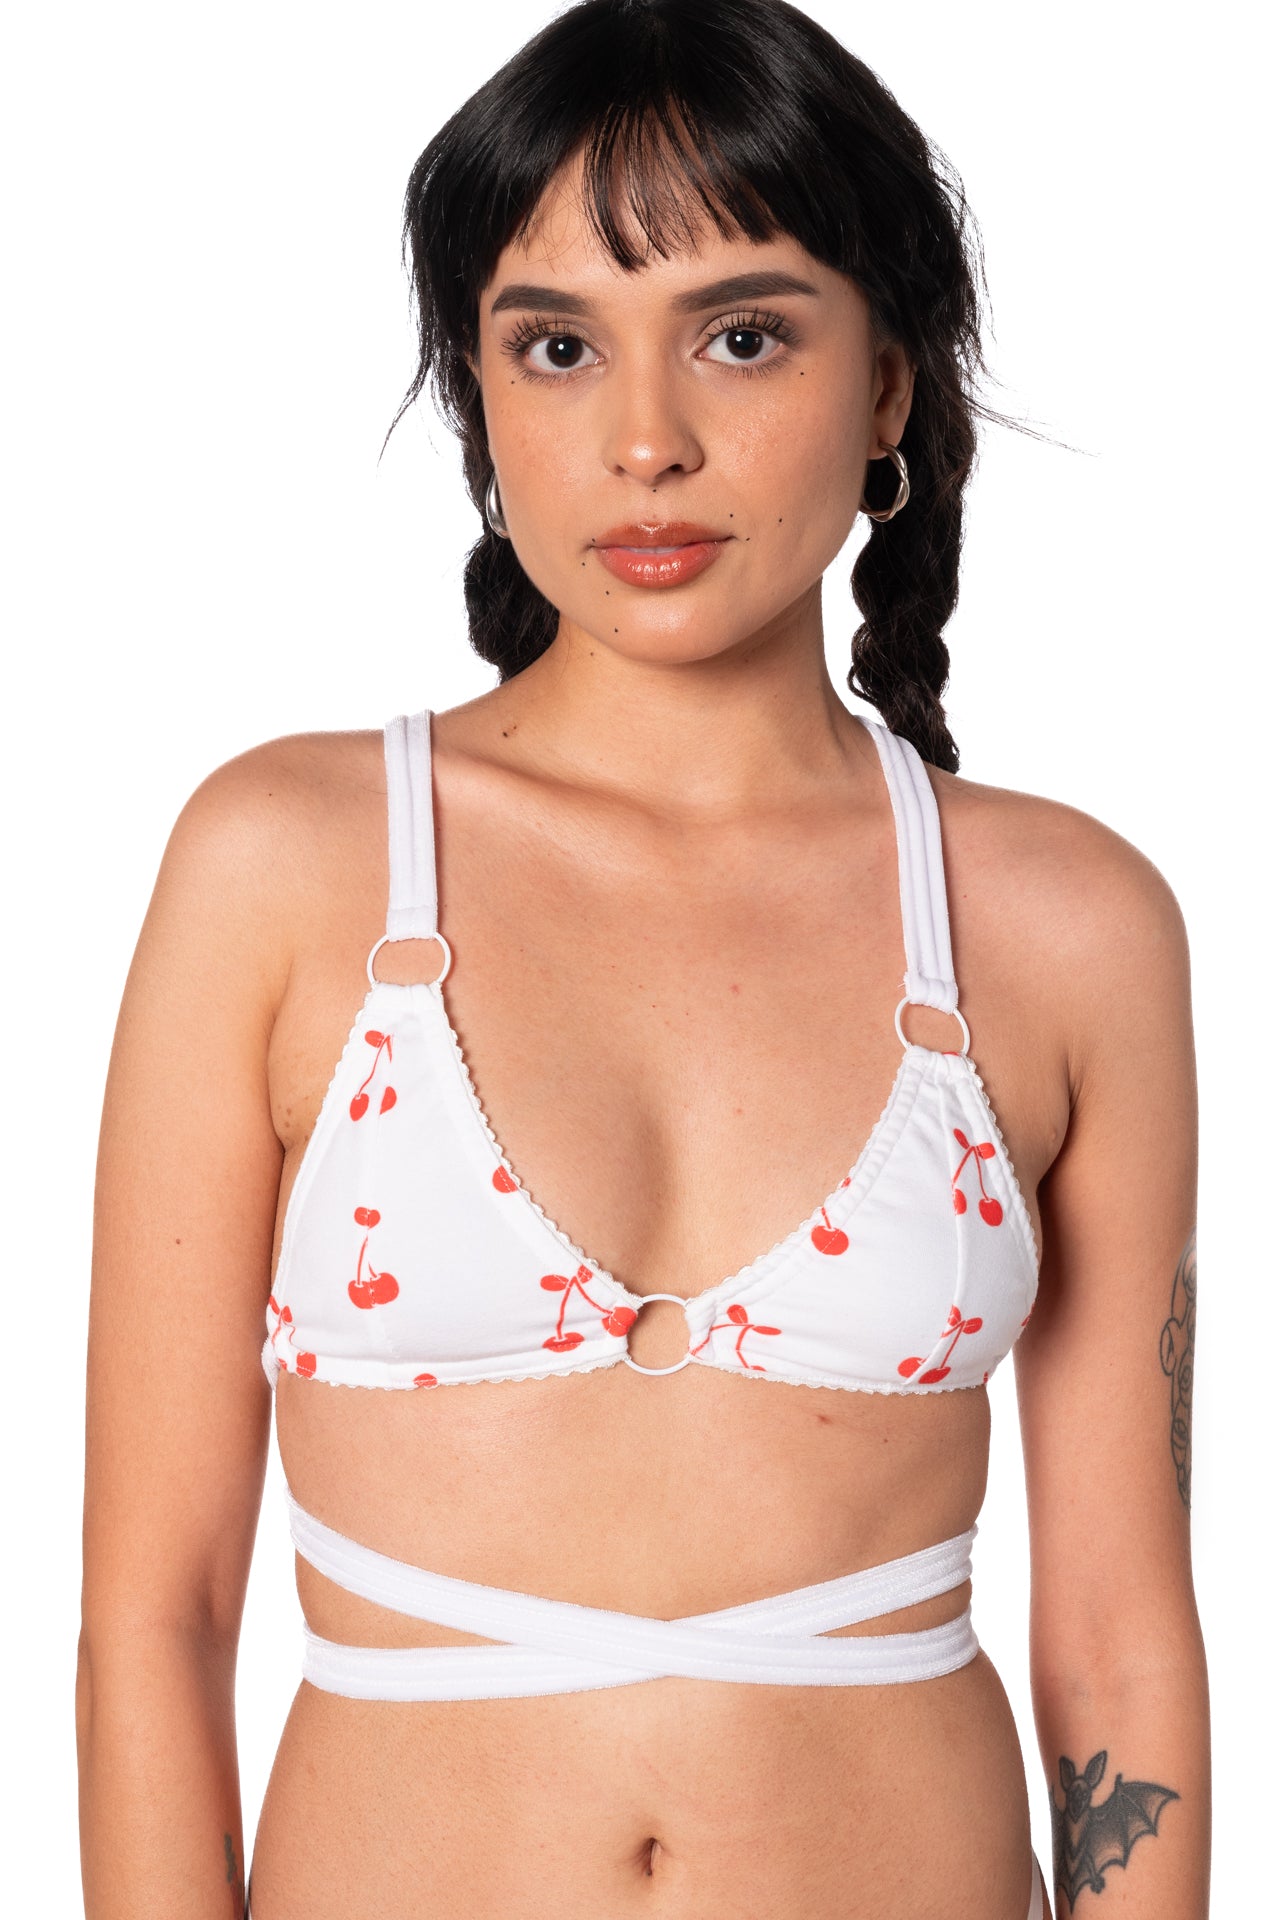 Padded Bra rts Push Up rts Non Wired Bralette Removable Padding